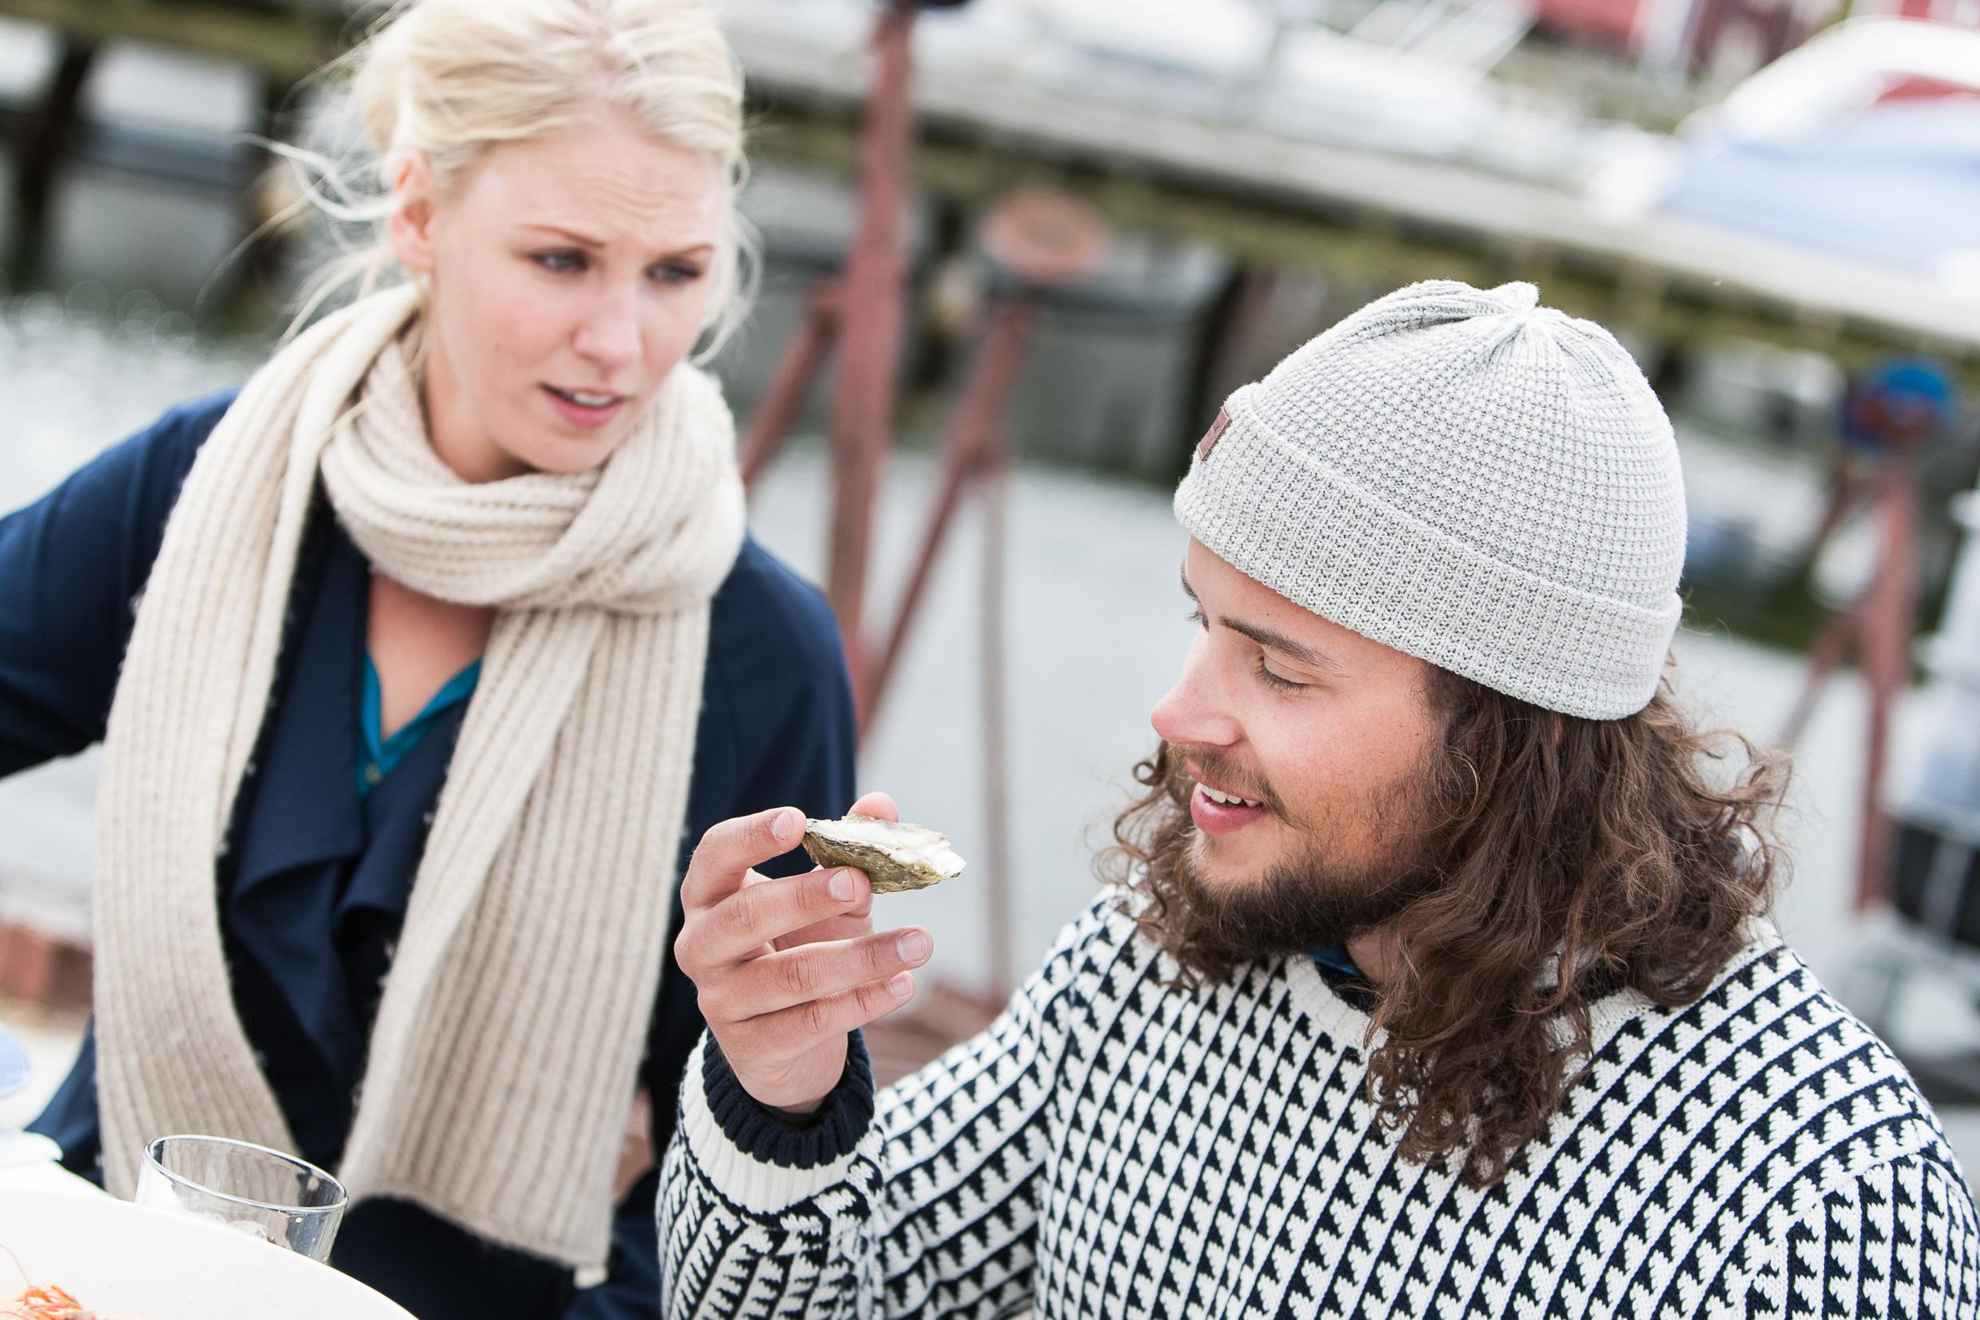 A man and a woman sits at a table outdoor. The man have an oyster in his hand.